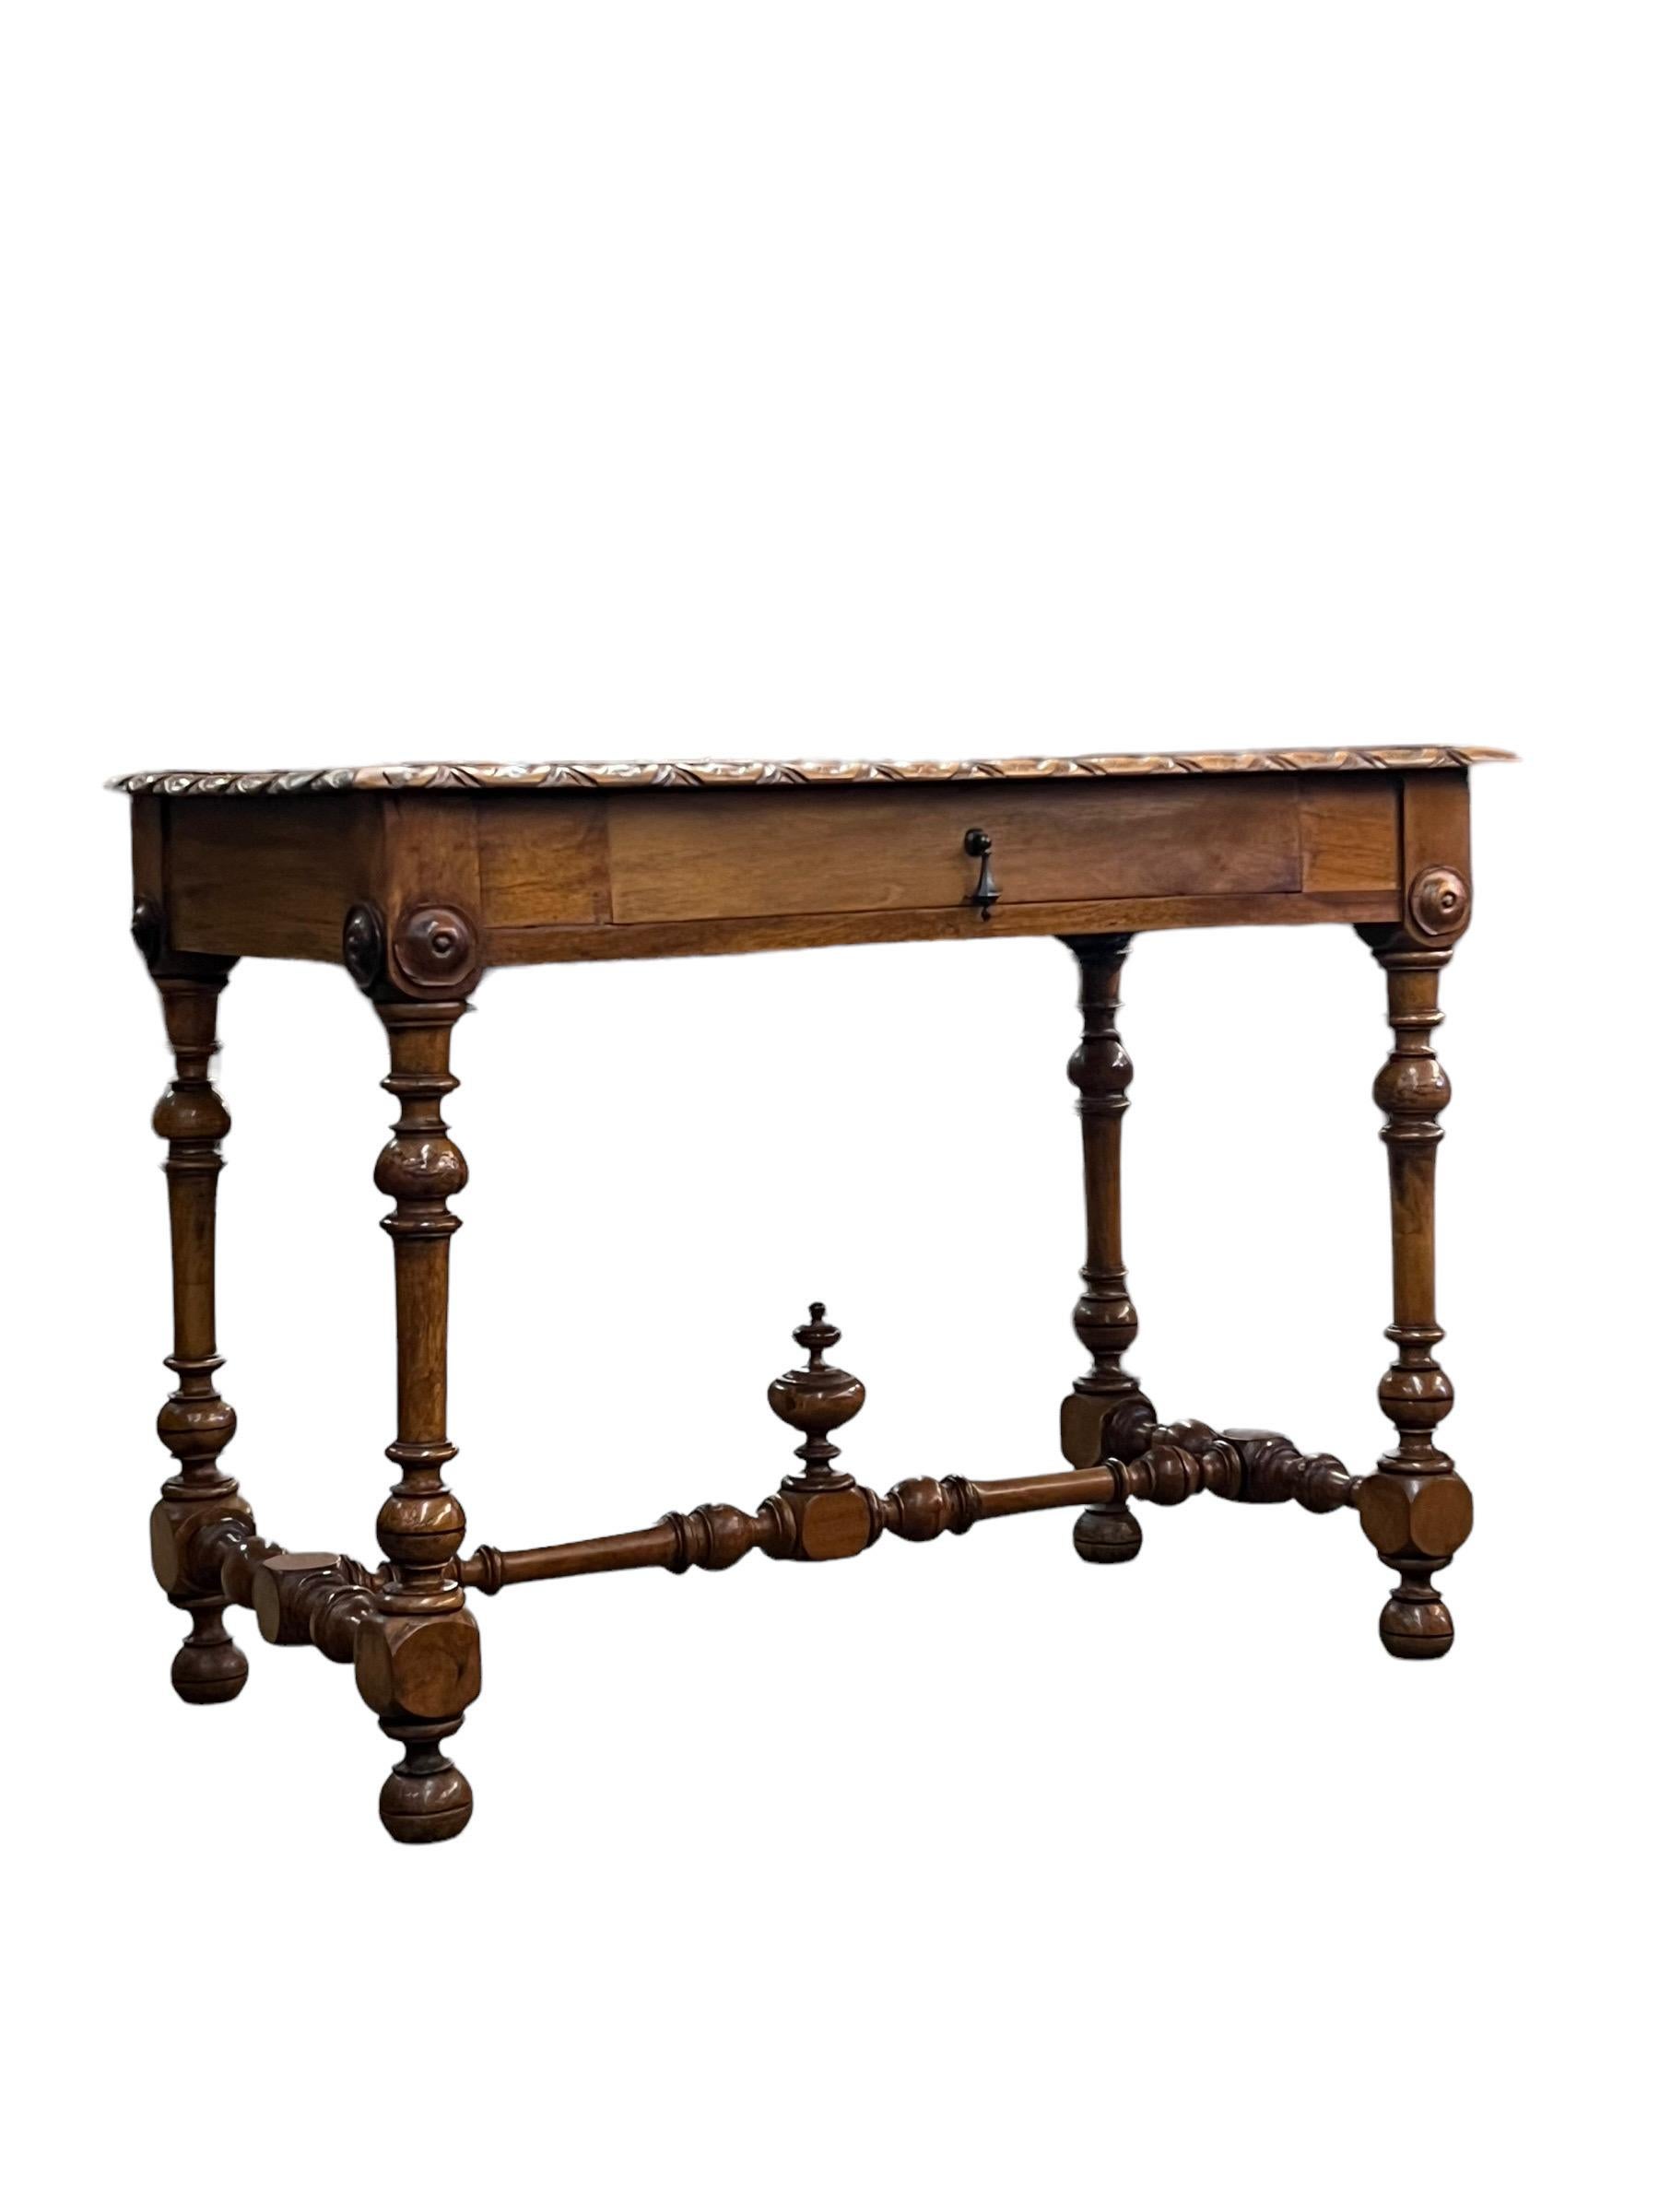 French Provincial 19th Century French Baroque Style Fruitwood Console Table or Writing Table For Sale